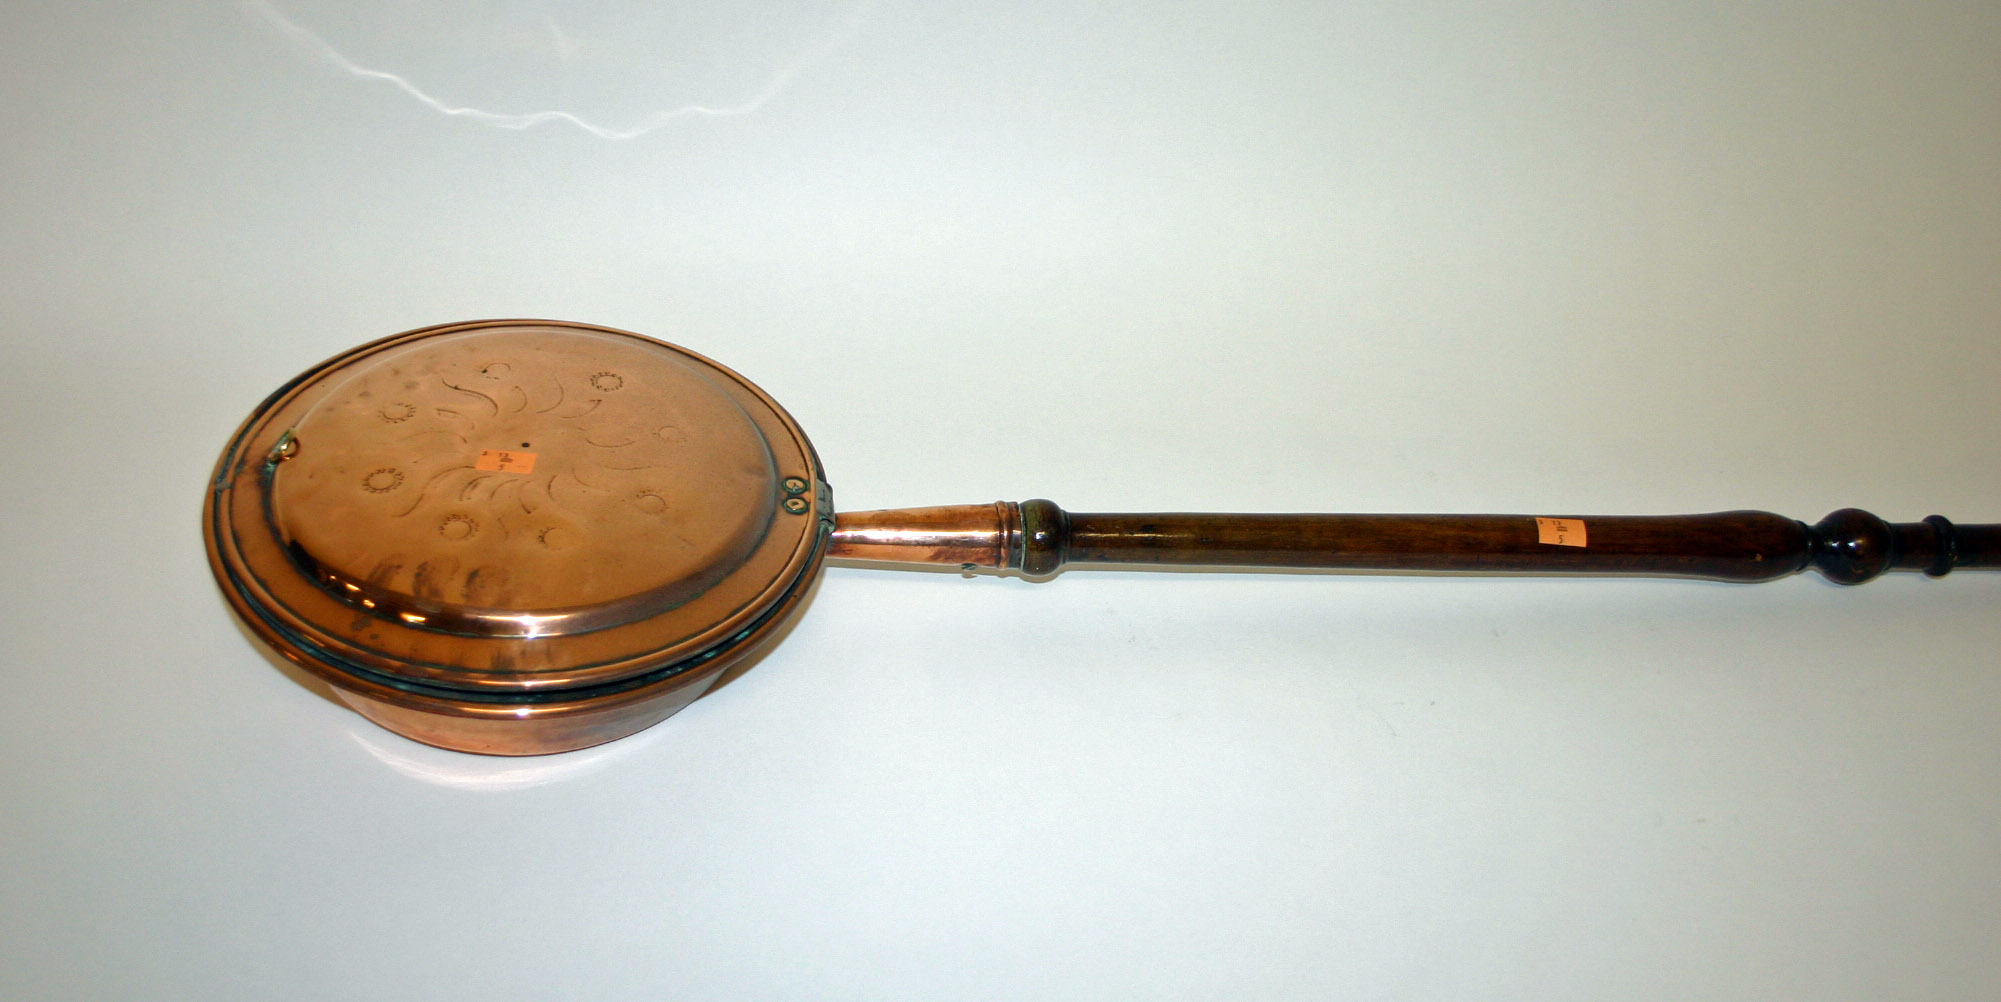 A COPPER BED WARMER, 19th century, with mahogany turned handle. (1)